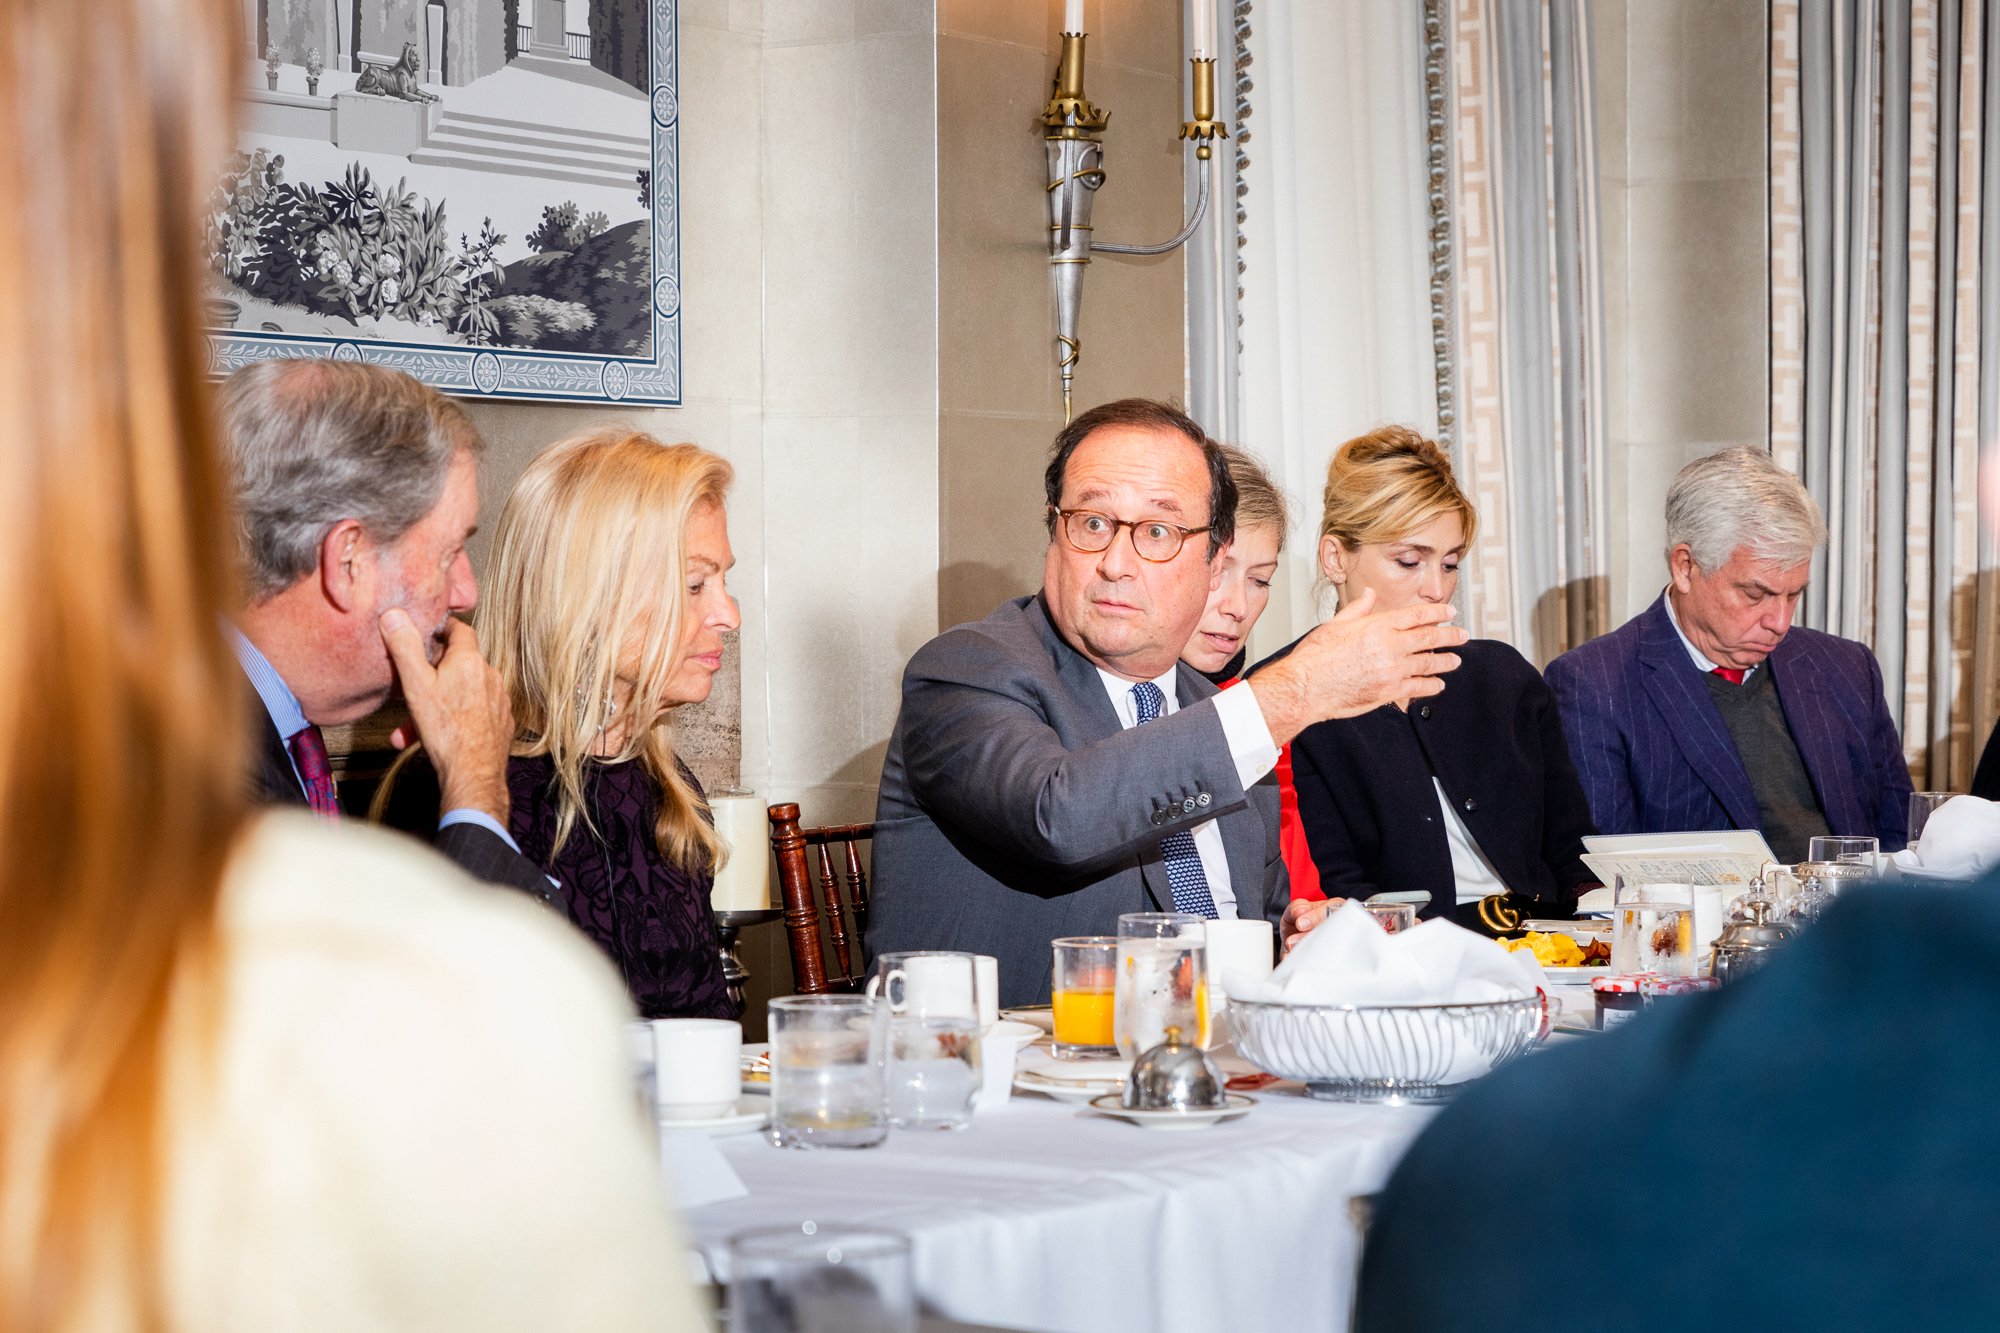  NEW YORK, NY - NOV 19 2019: Former president of France, François Hollande, speaks to guests at the Links Club, on November 19th, 2019, in New York, NY. (Photo by Kari Bjorn) 